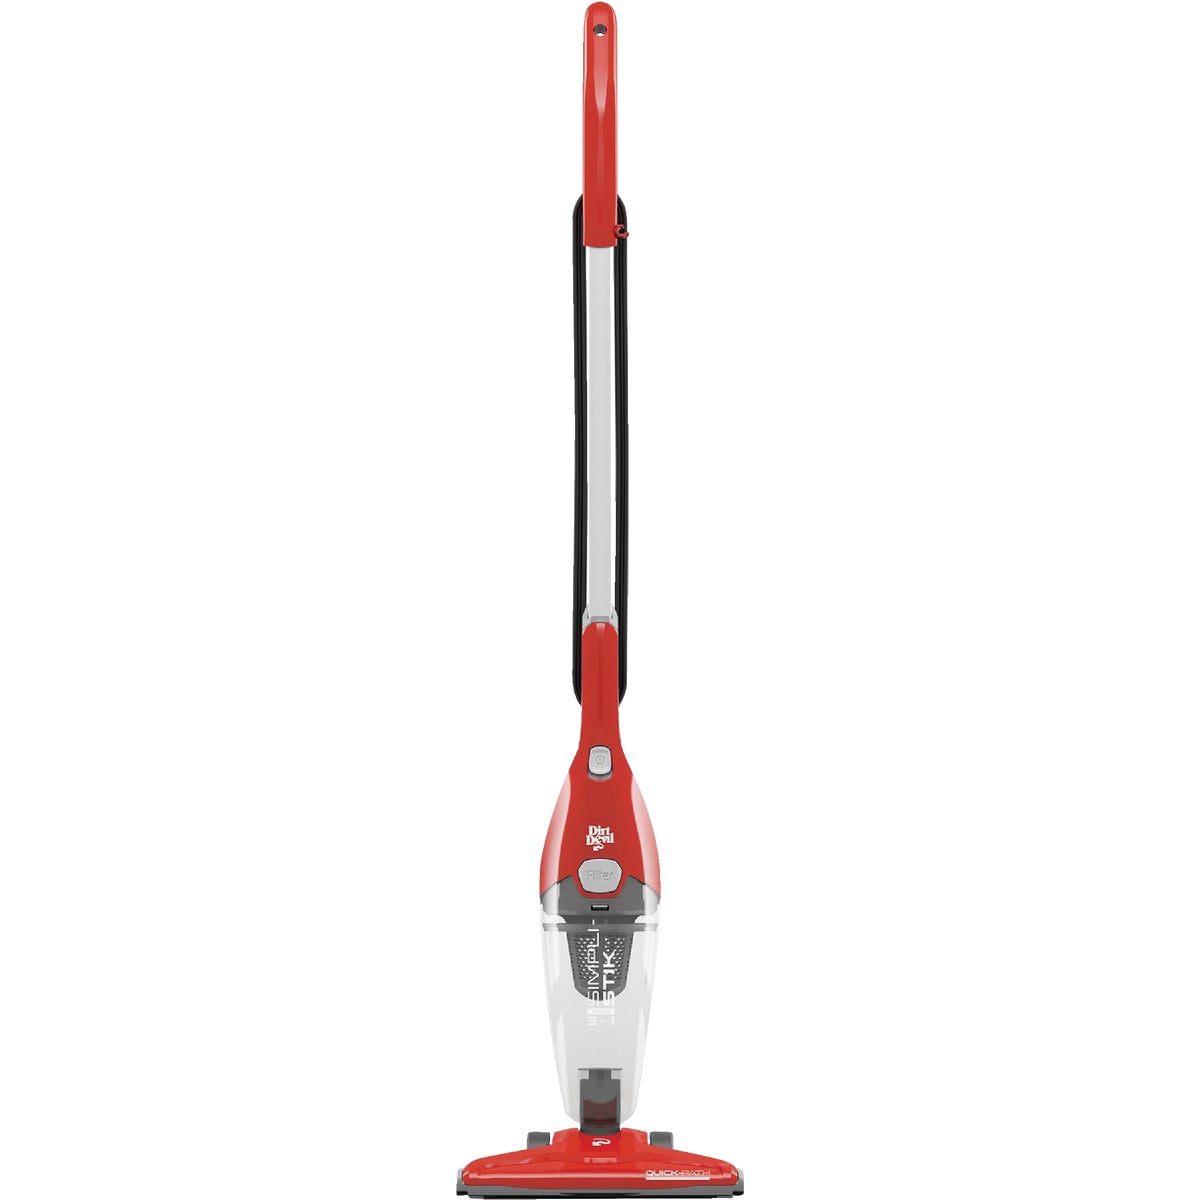 Item 603135, Lightweight and easy to use stick vacuum is ideal for hard floors and 